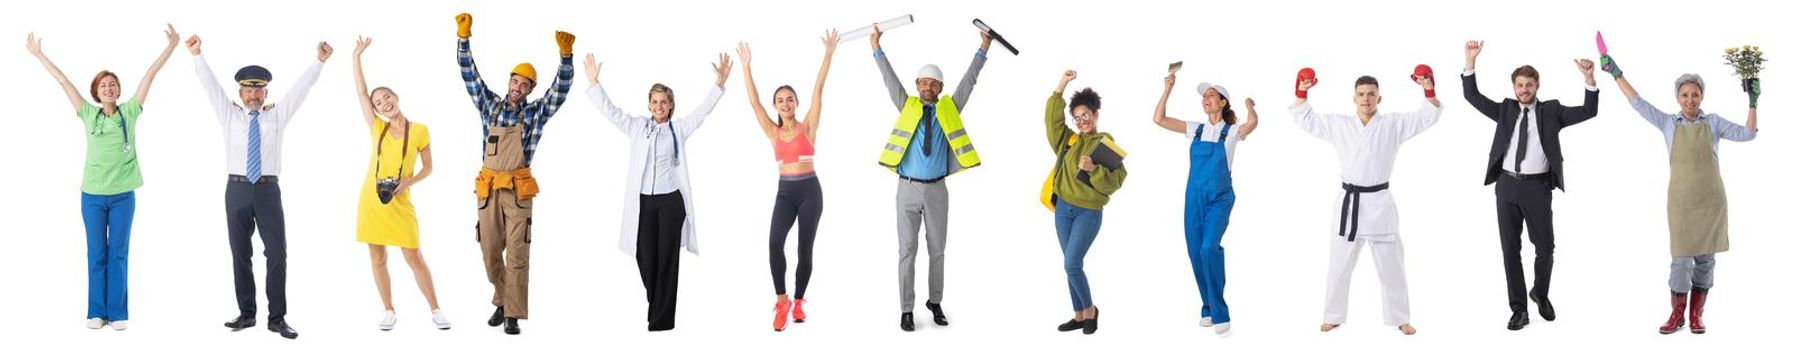 Set collage of professional workers isolated on white background, full length portrait, arms raised, success hr concept